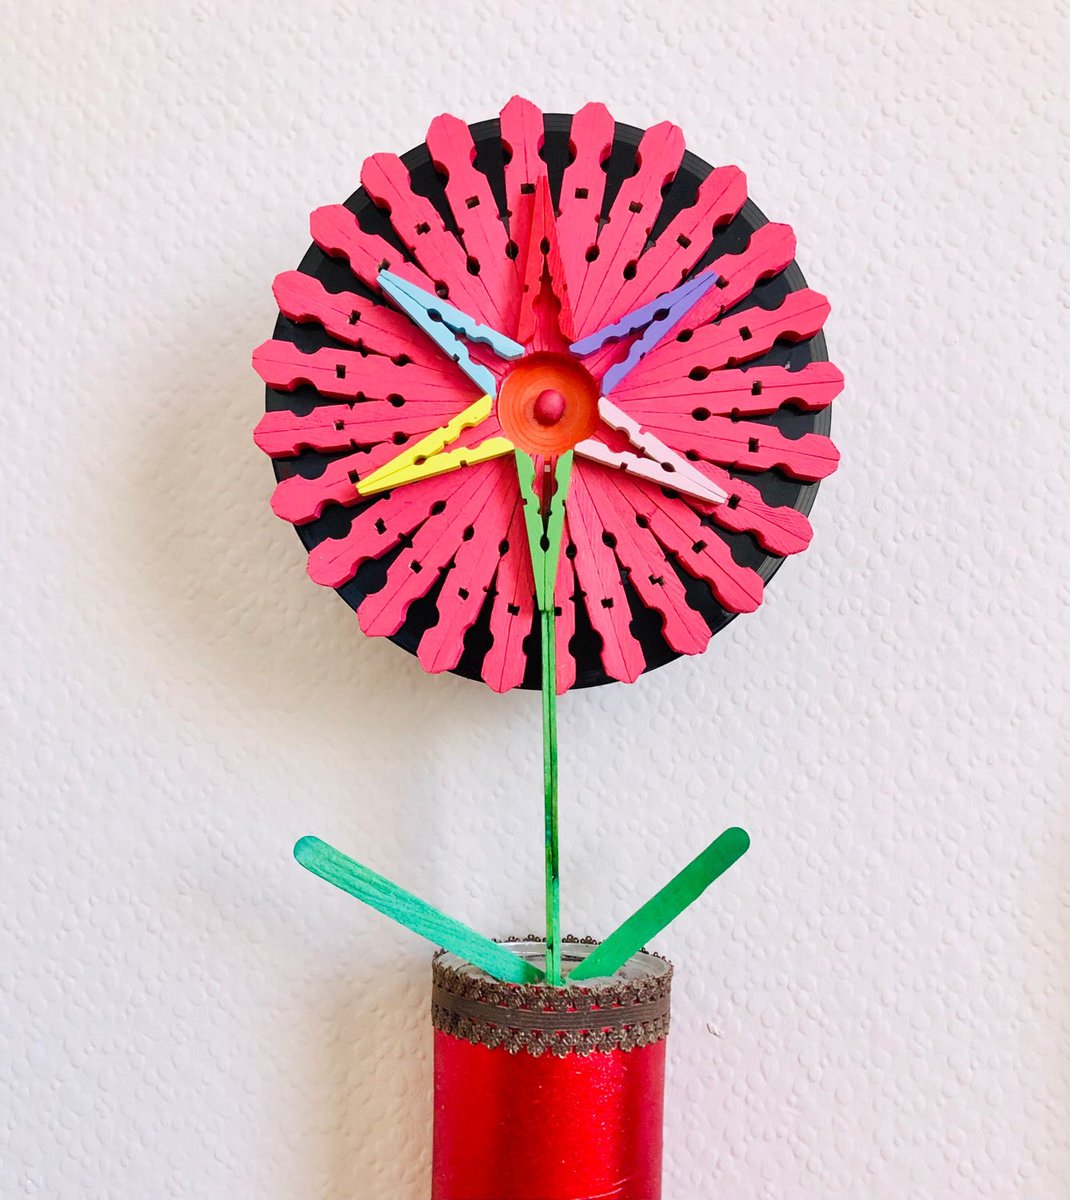 Excited to share this item from my #etsy shop: Handmade Rustic wooden Sun Flower Art Decor Gift #contemporary #handmadeflower #woodenretro #quirkyunusual #eastergifts etsy.me/3DtYdMd